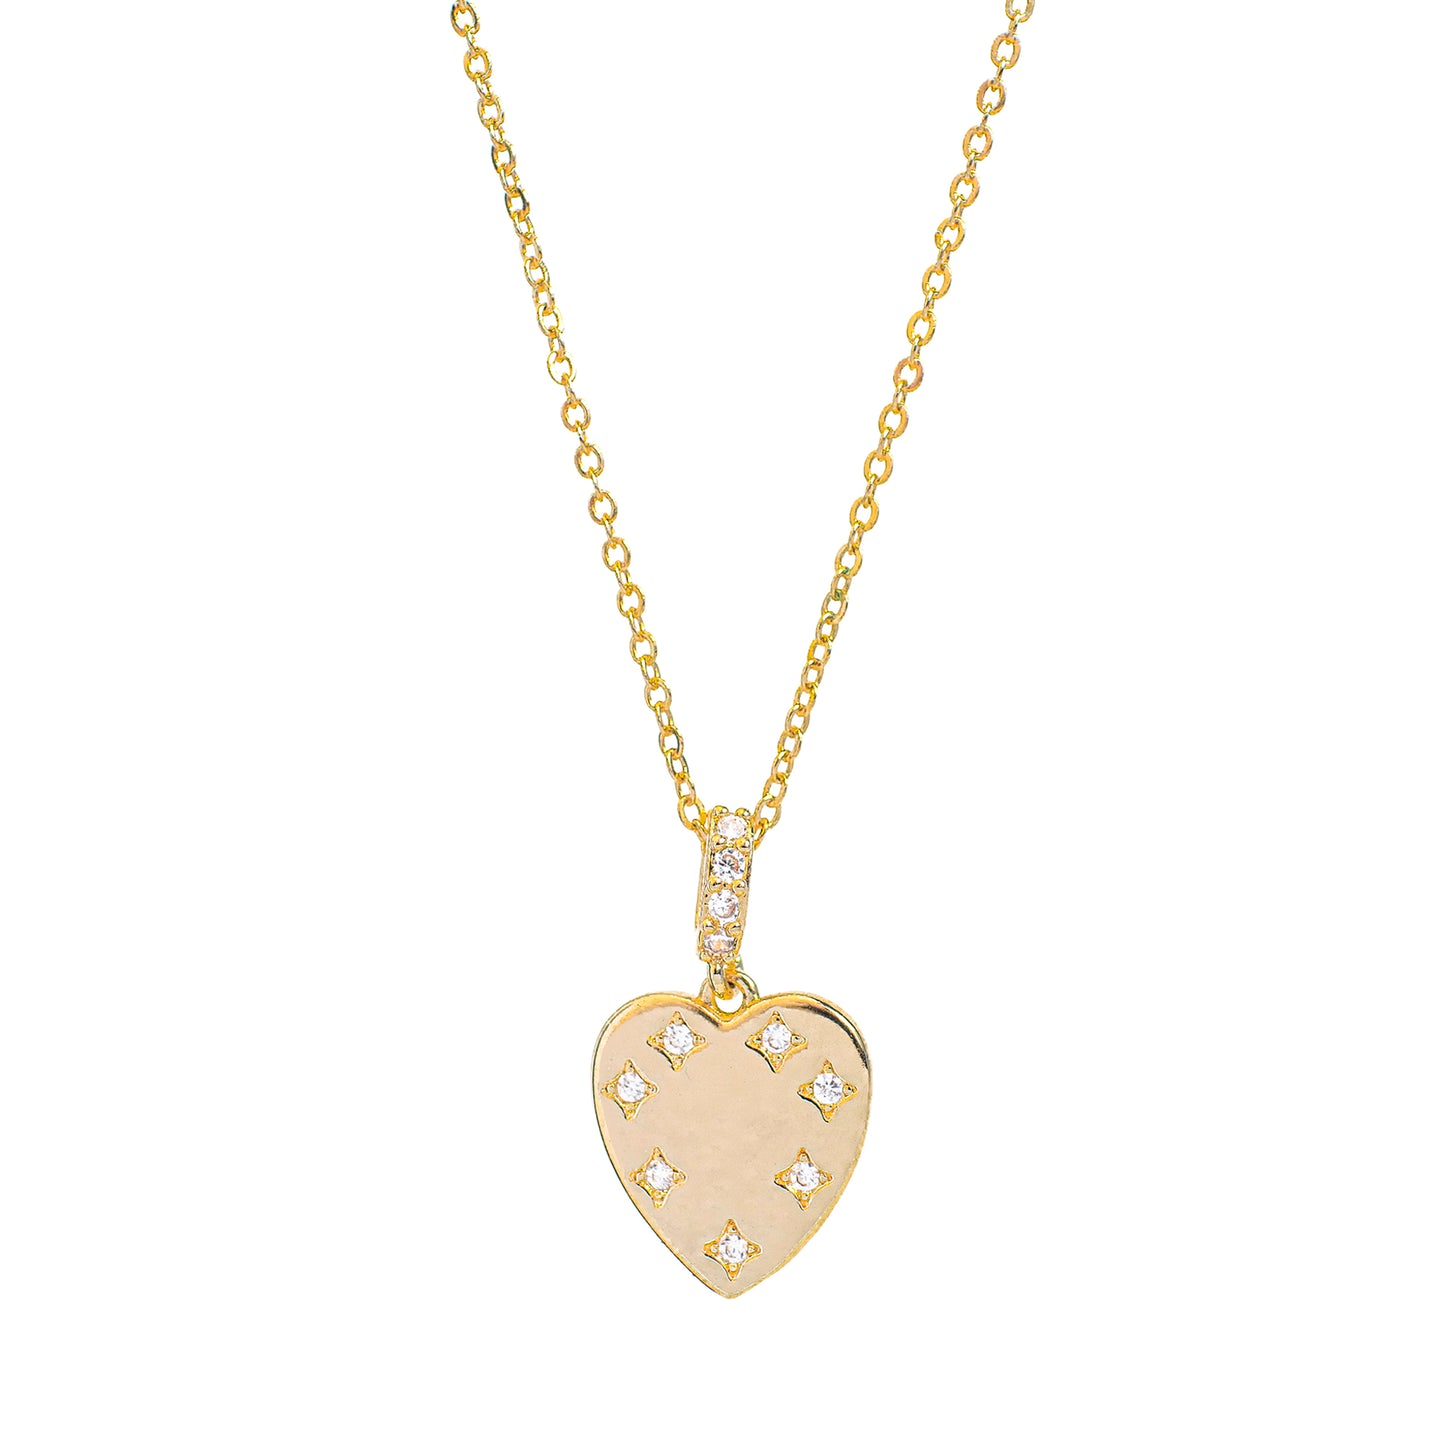 This photo features a thin chain necklace made of 14K gold-plated sterling silver, paired with zircon heart necklace